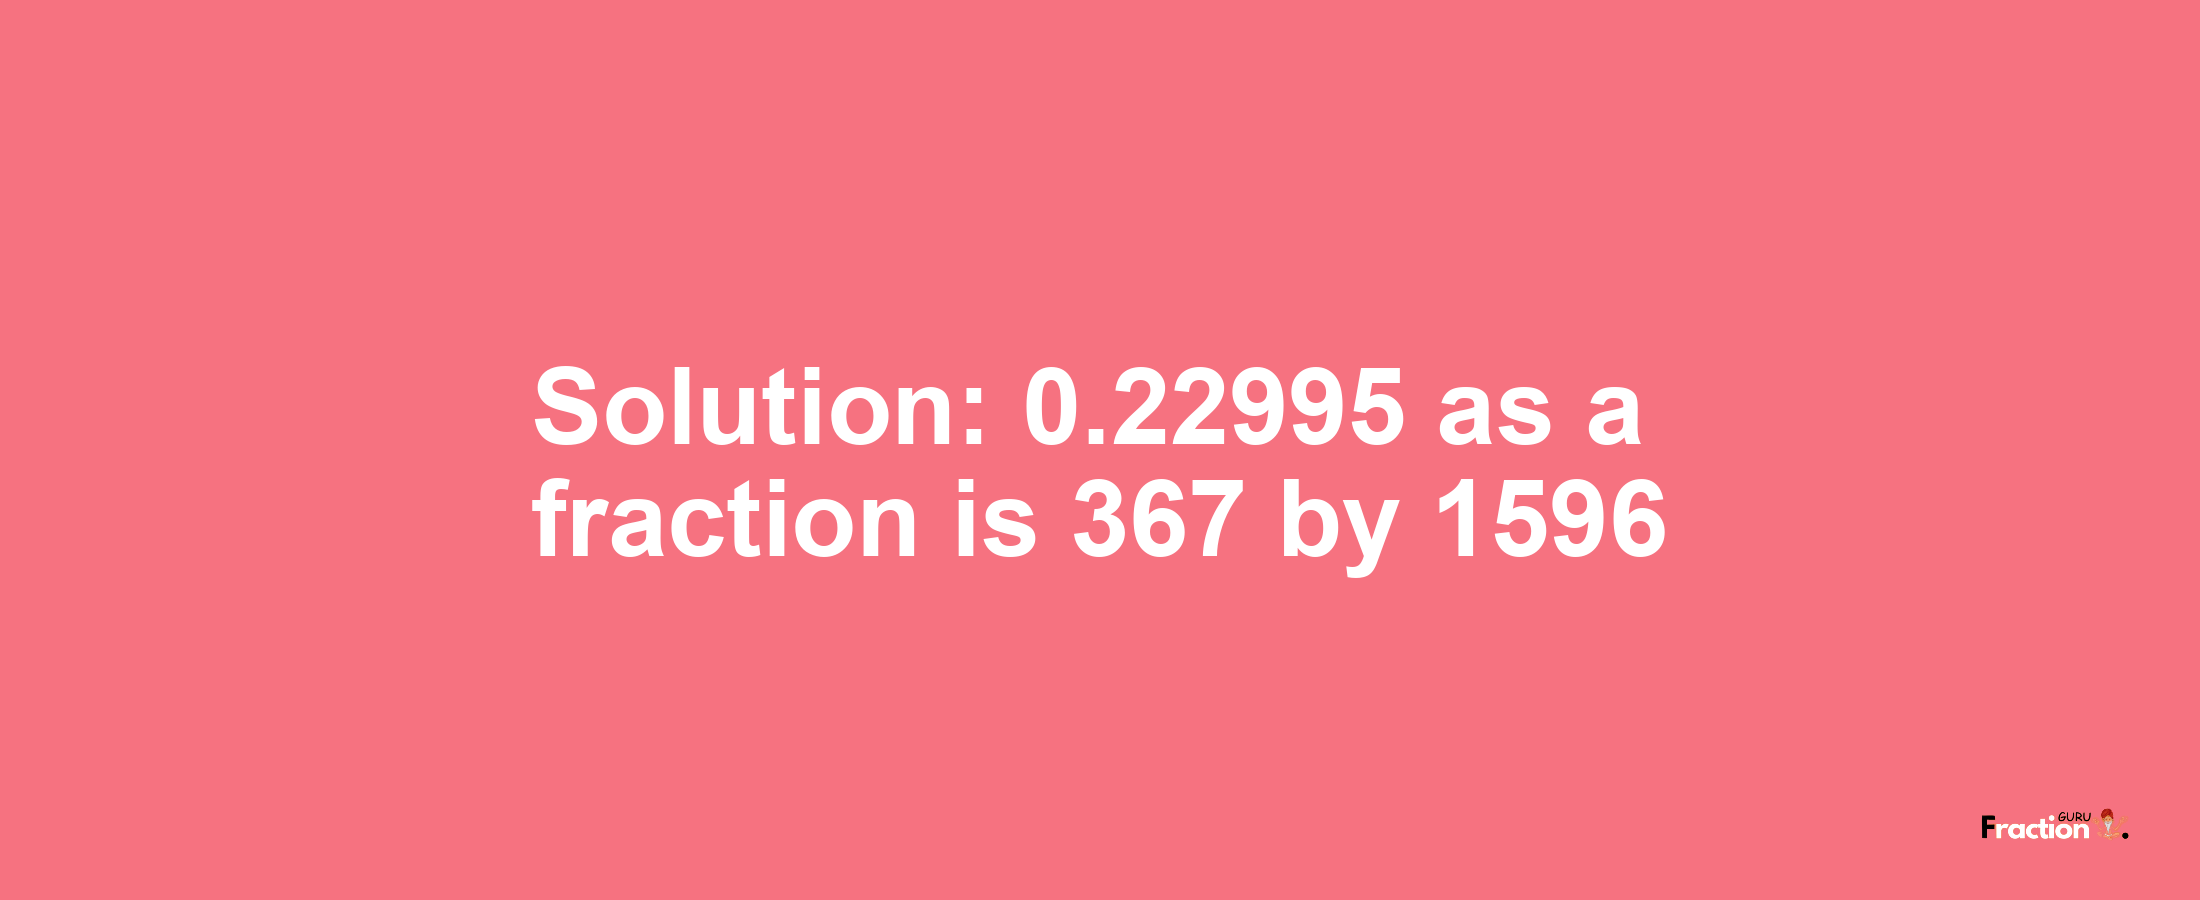 Solution:0.22995 as a fraction is 367/1596